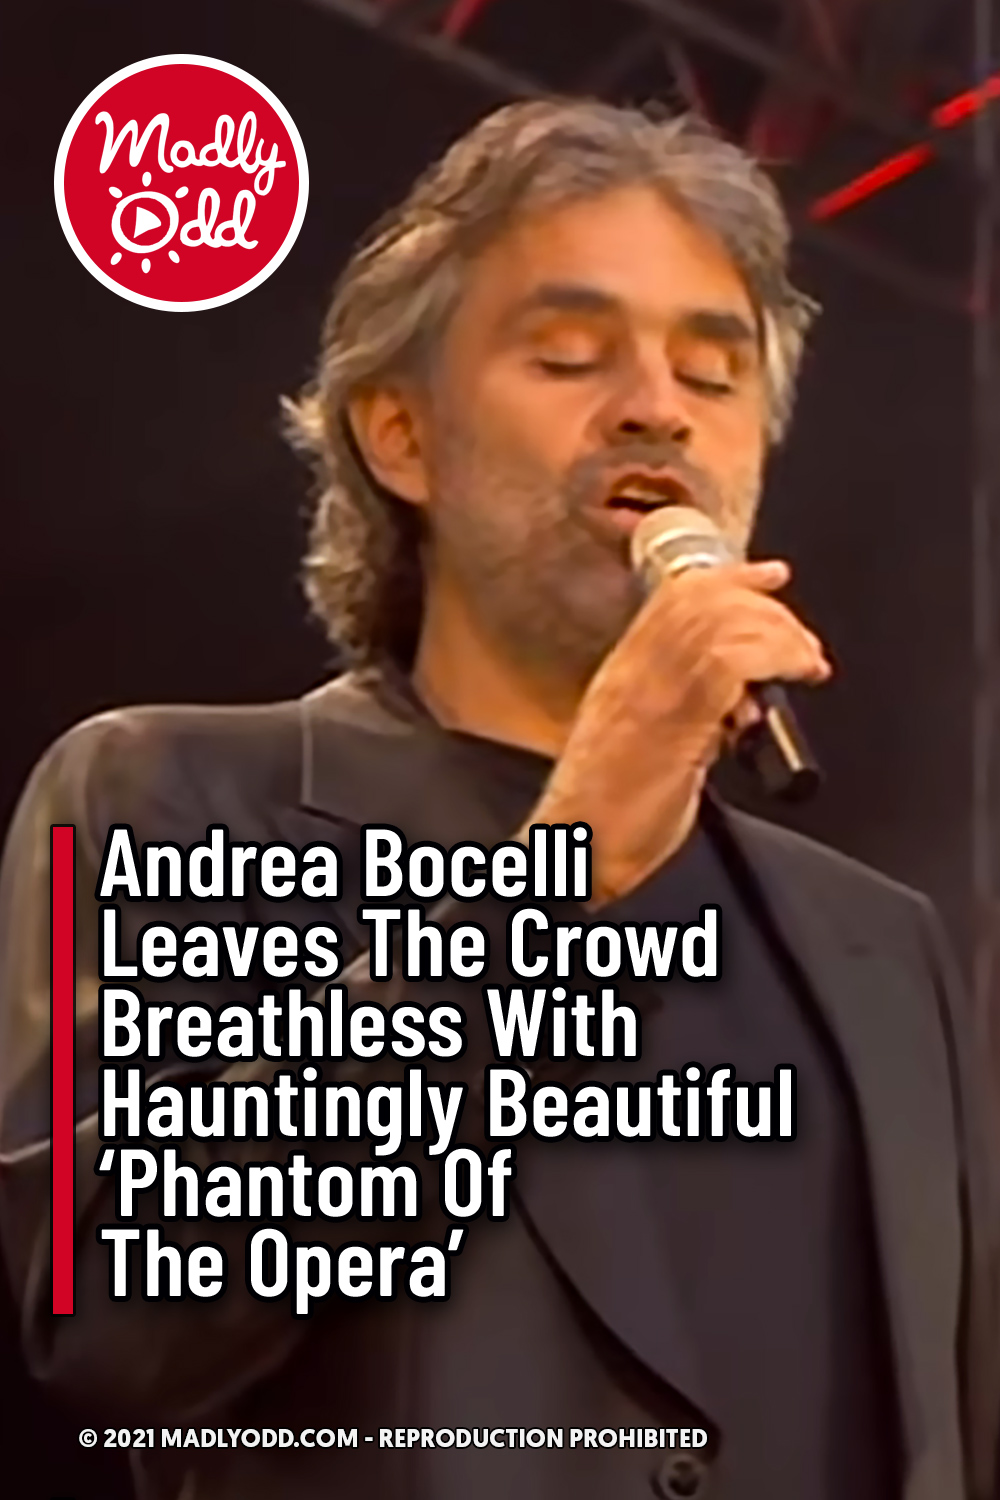 Andrea Bocelli Leaves The Crowd Breathless With Hauntingly Beautiful \'Phantom Of The Opera\'